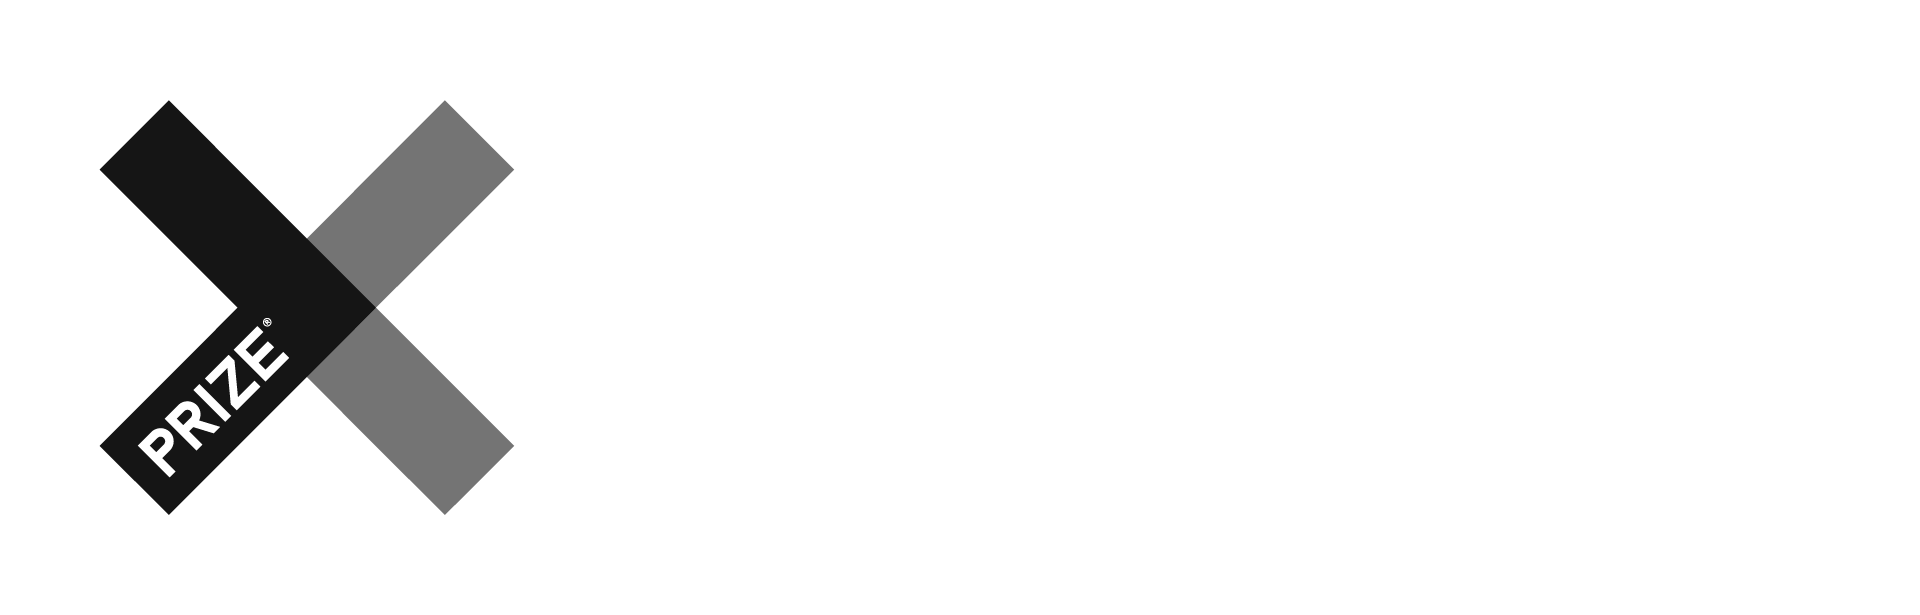 XPRIZE Wildfire